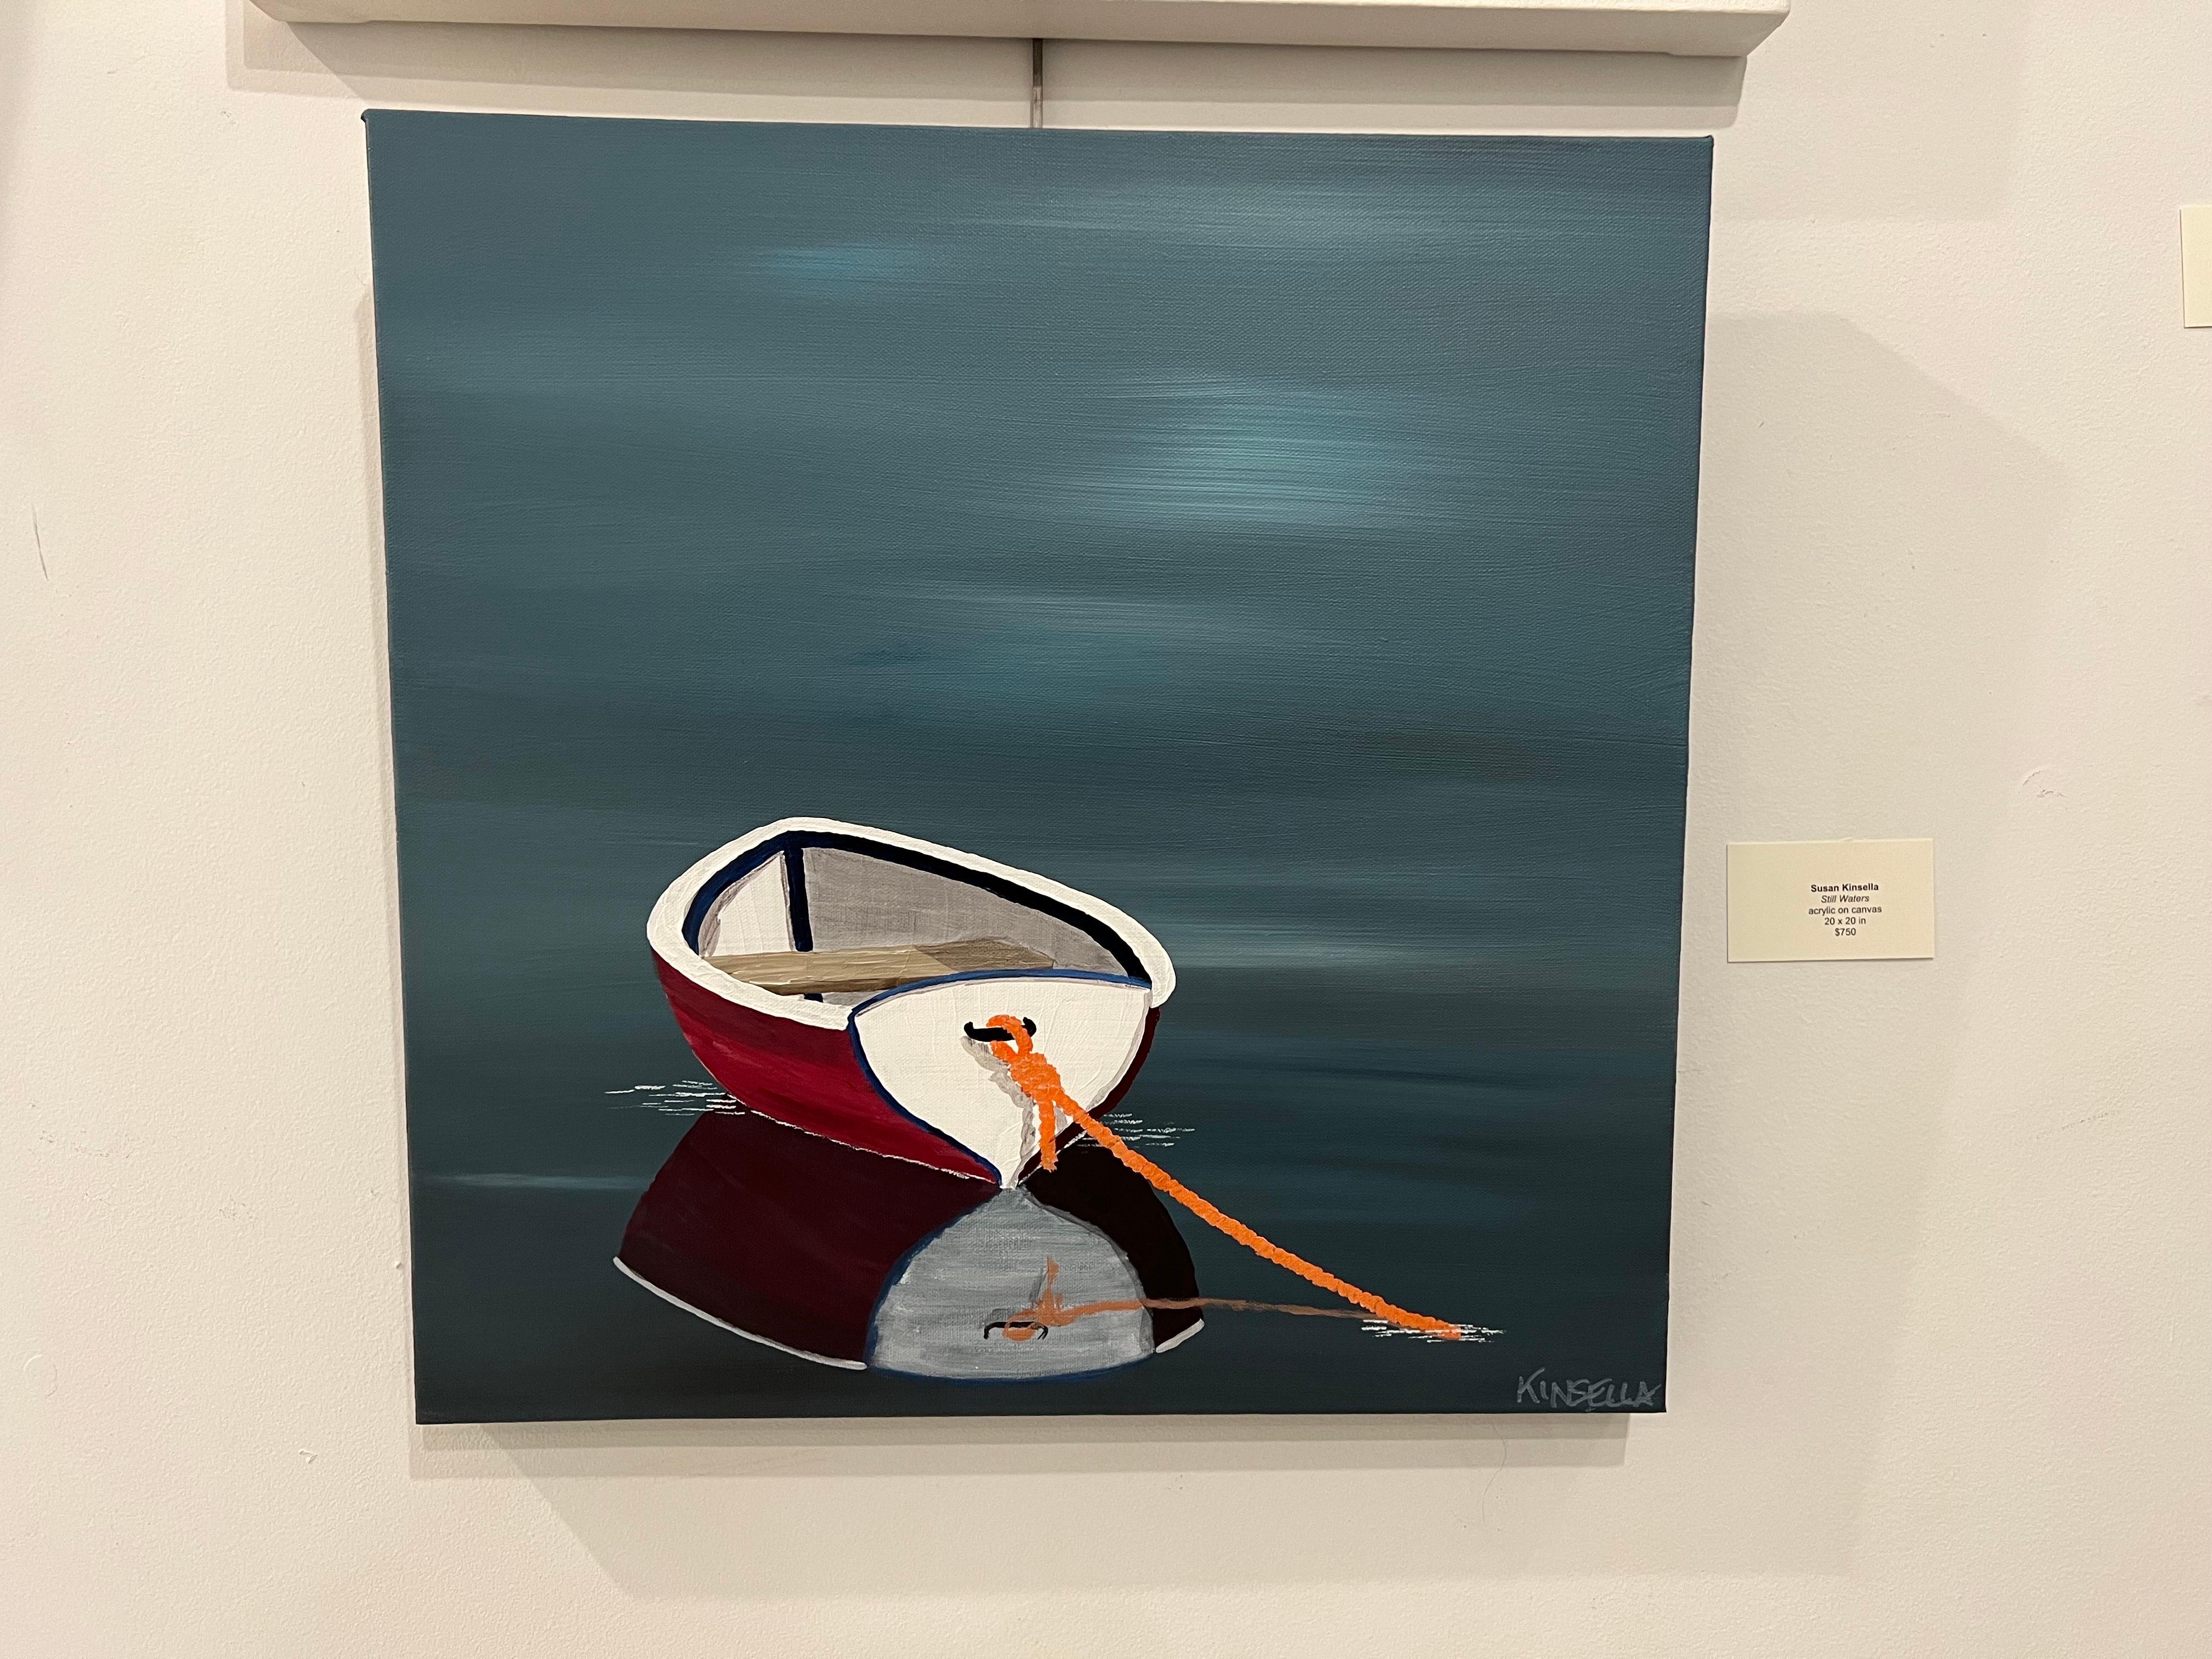 'Still Waters' is a square representational acrylic on canvas painting of a row boat with blue accents float tethered by an orange rope created by American artist Susan Kinsella in 2023. Featuring an exquisite palette mostly made of navy, gray and